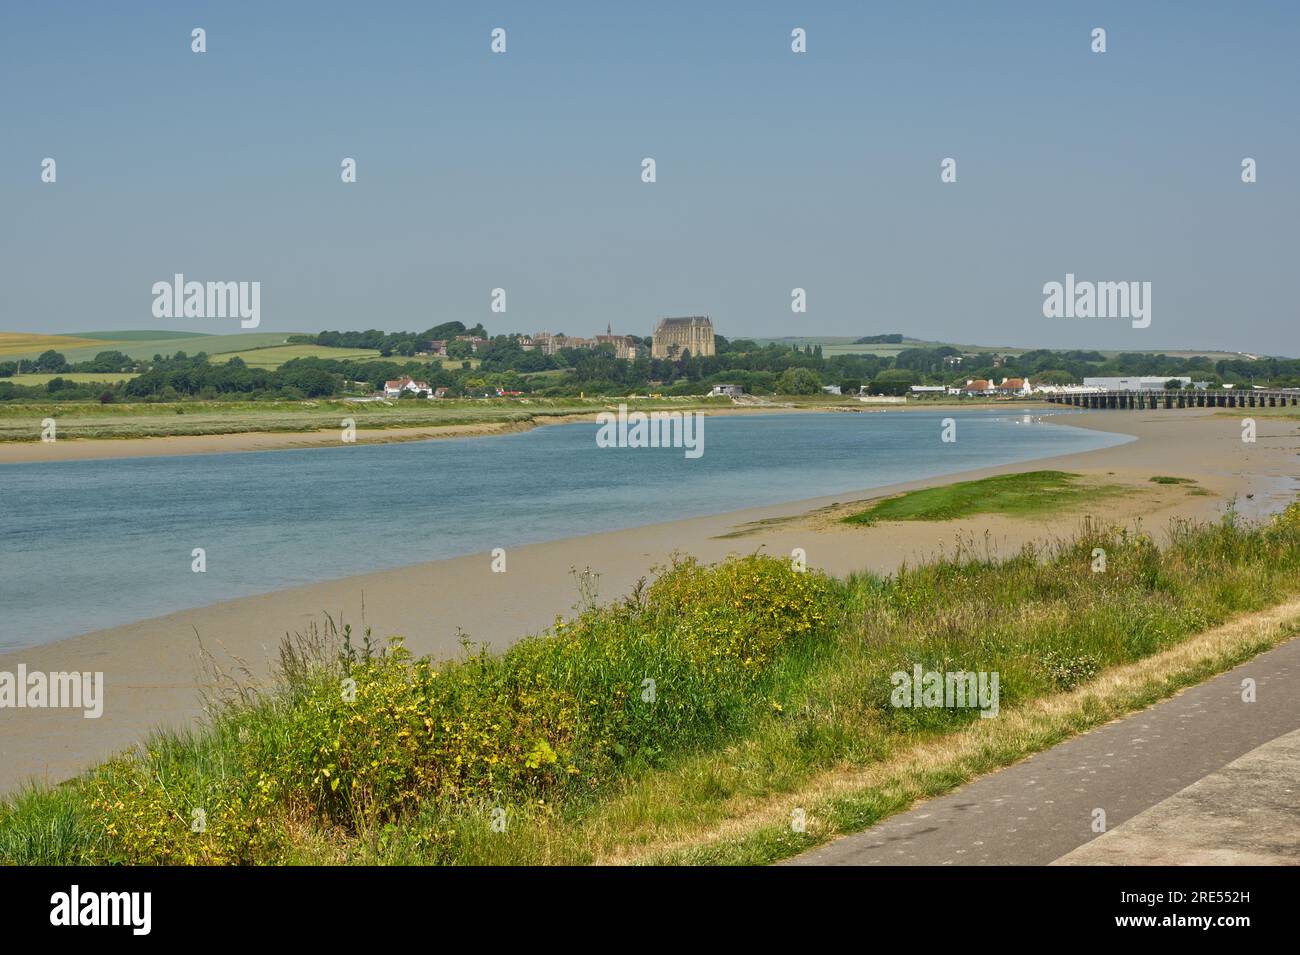 River Adur at low tide. Shoreham in West Sussex, England. With Lancing college and old wooden bridge in background. Stock Photo